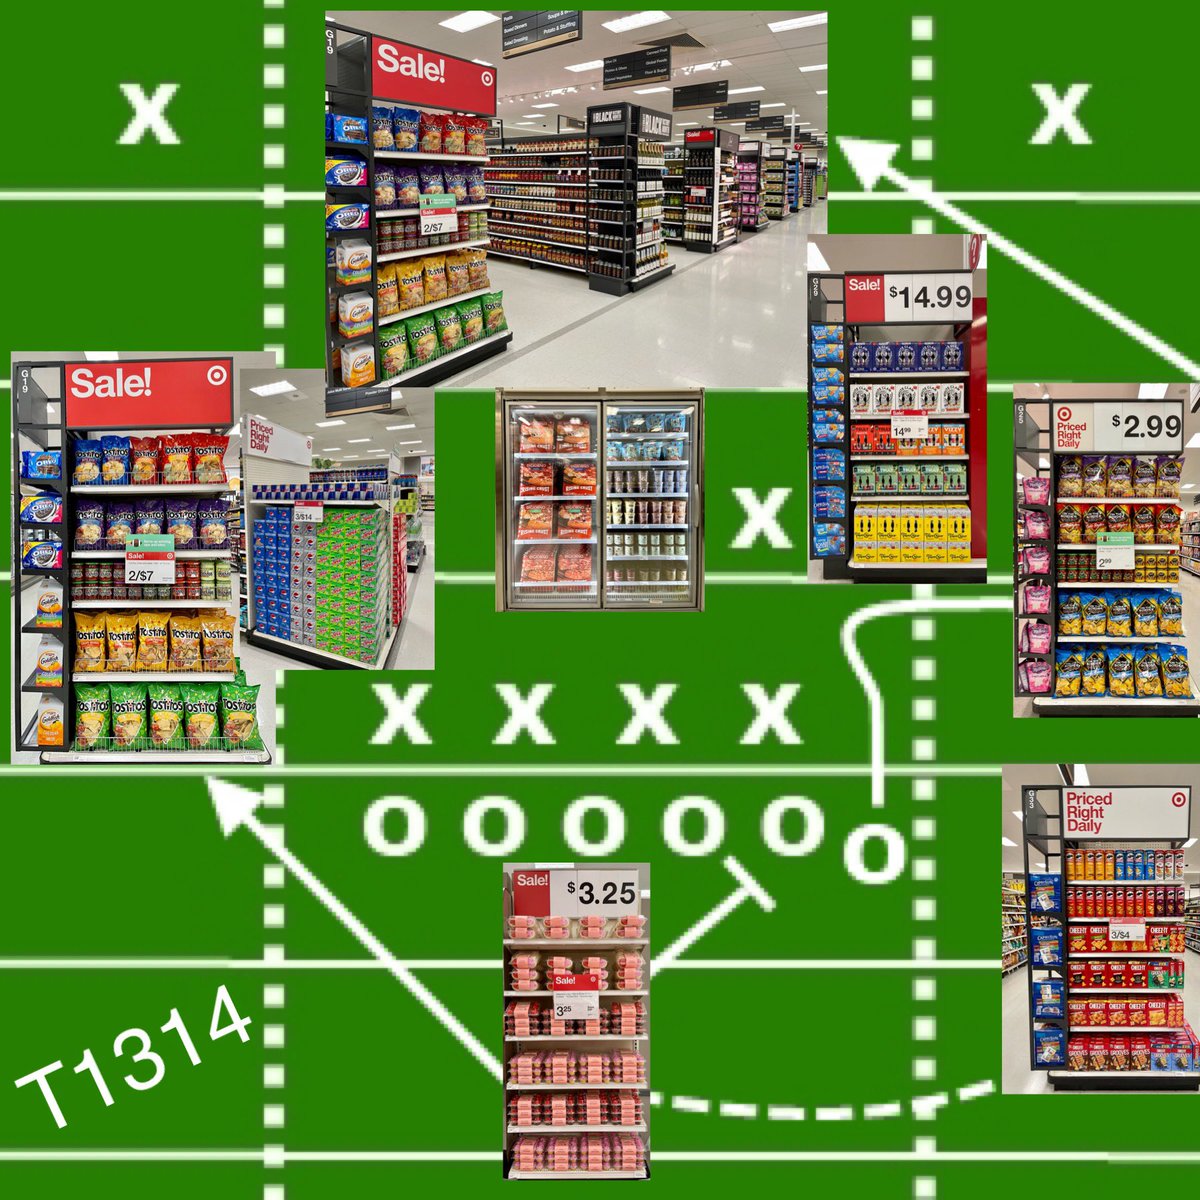 Be ready and score early to win this #SuperBowl Sunday! 🏈 #T1314 #D117 #G194 🎯 #FullFloorSalesSoar #BrandIsKing #FillisQueen #DownSetSnacks @BreeFromTarget @heit_tim @TargetTat @HaticAdna @Jessica_berry23 @nick_waller15 @AdamHorn899